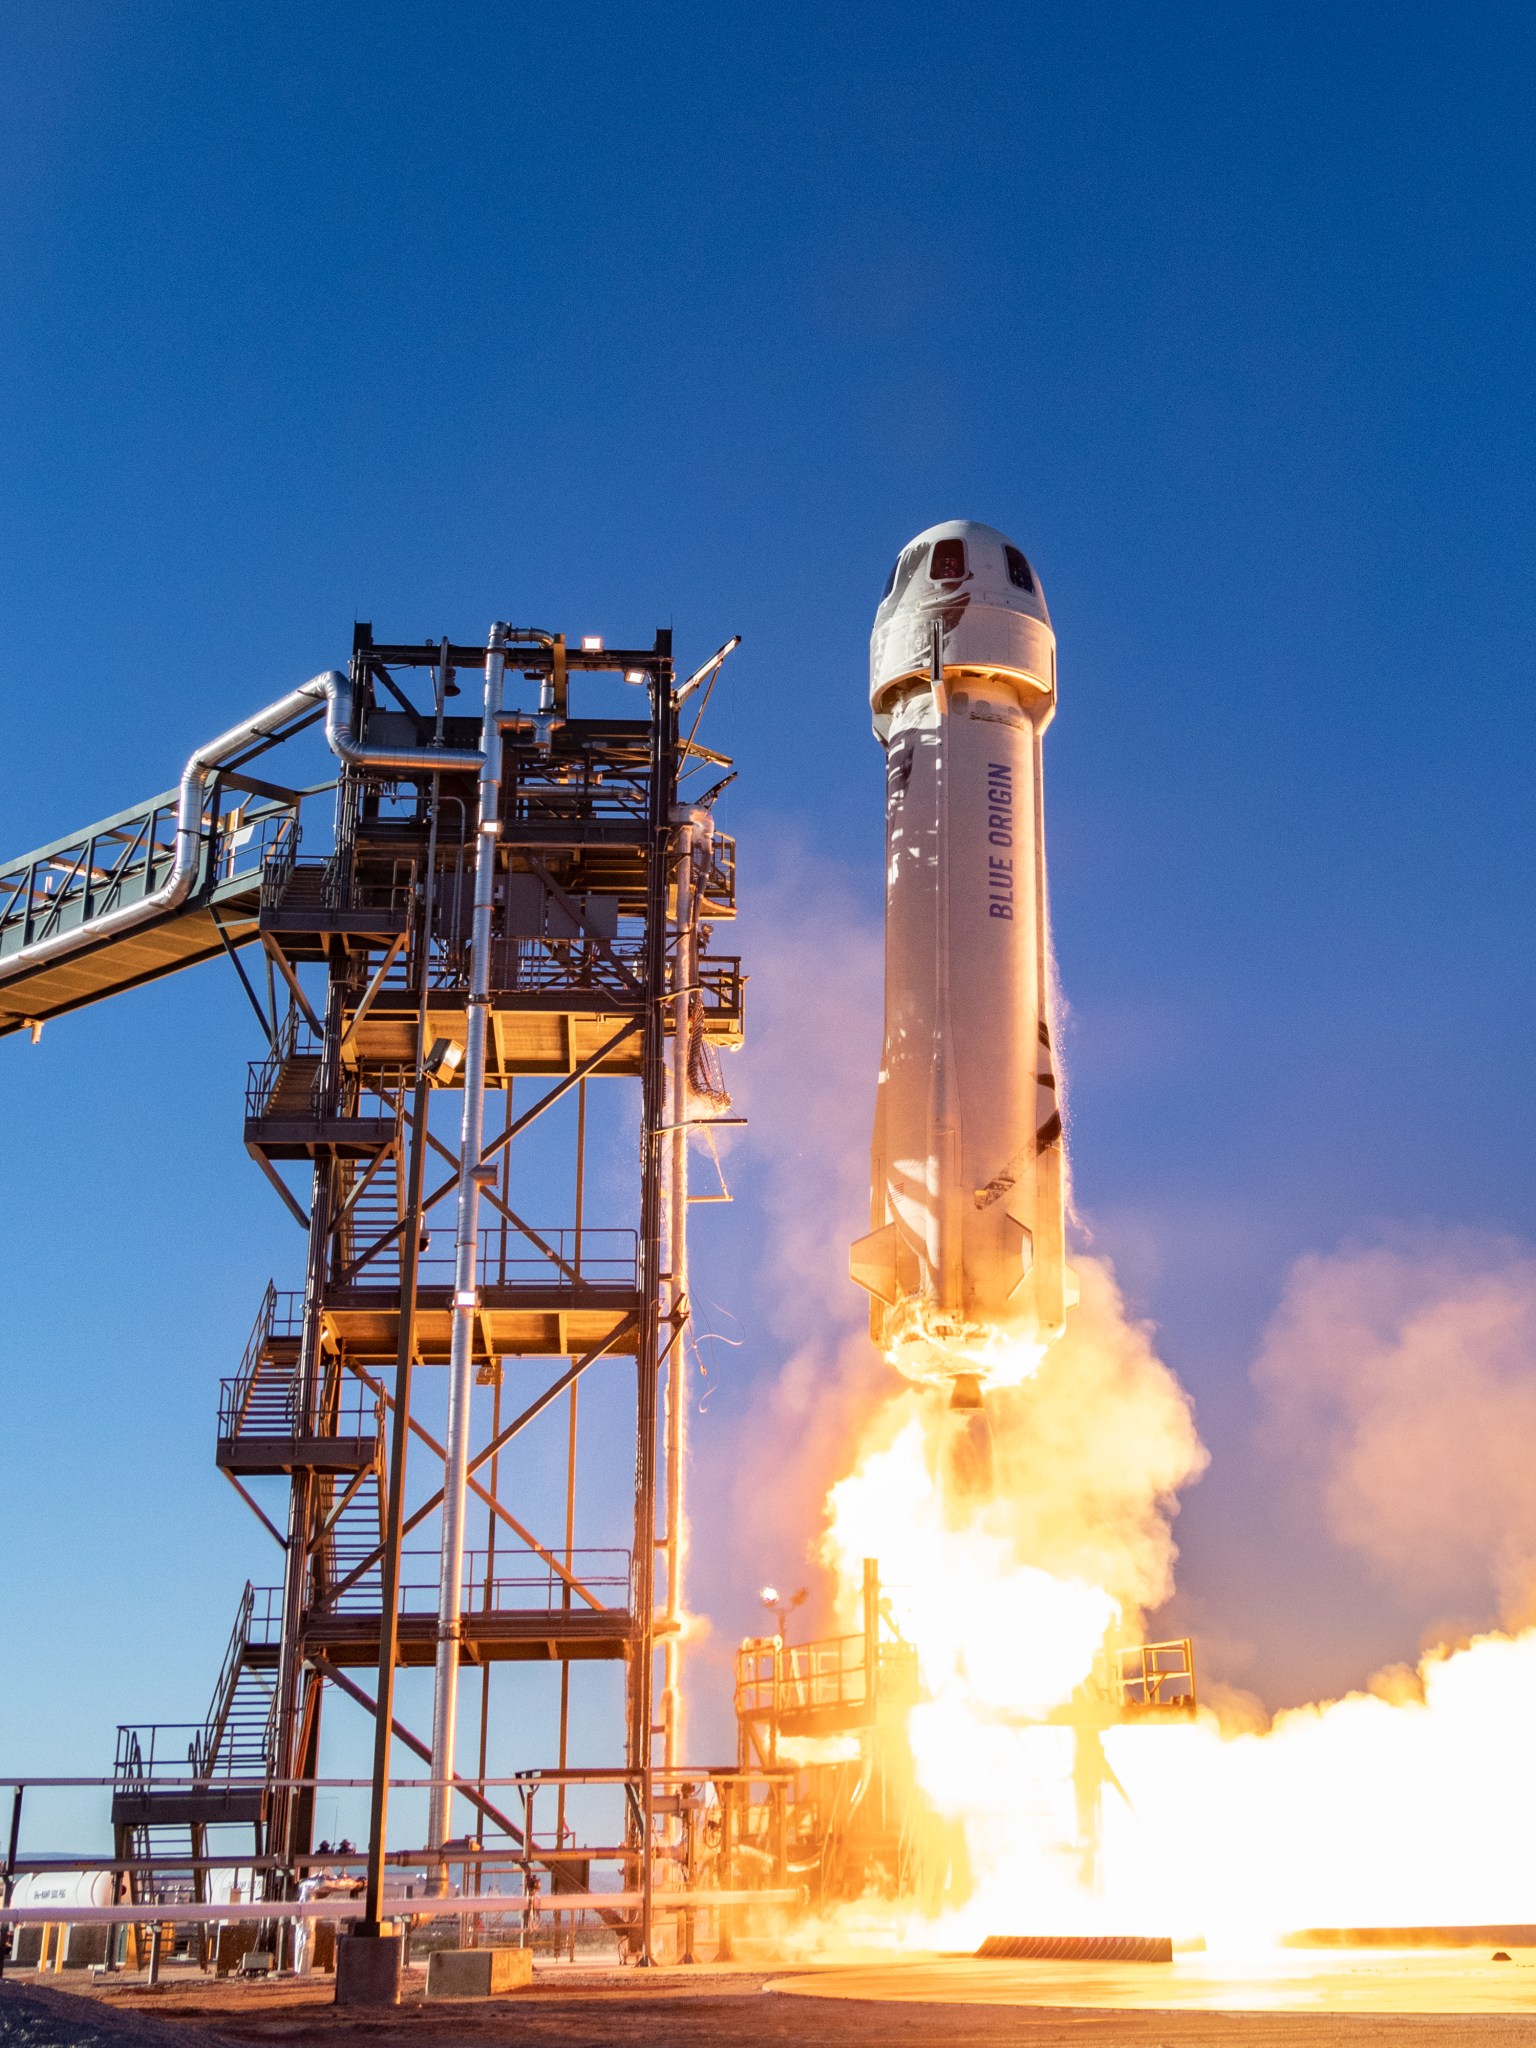 Rocket with "Blue Origin" on the side lifting off on the launch pad. There is fire and smoke coming from the bottom of the rocket as it lifts off. 